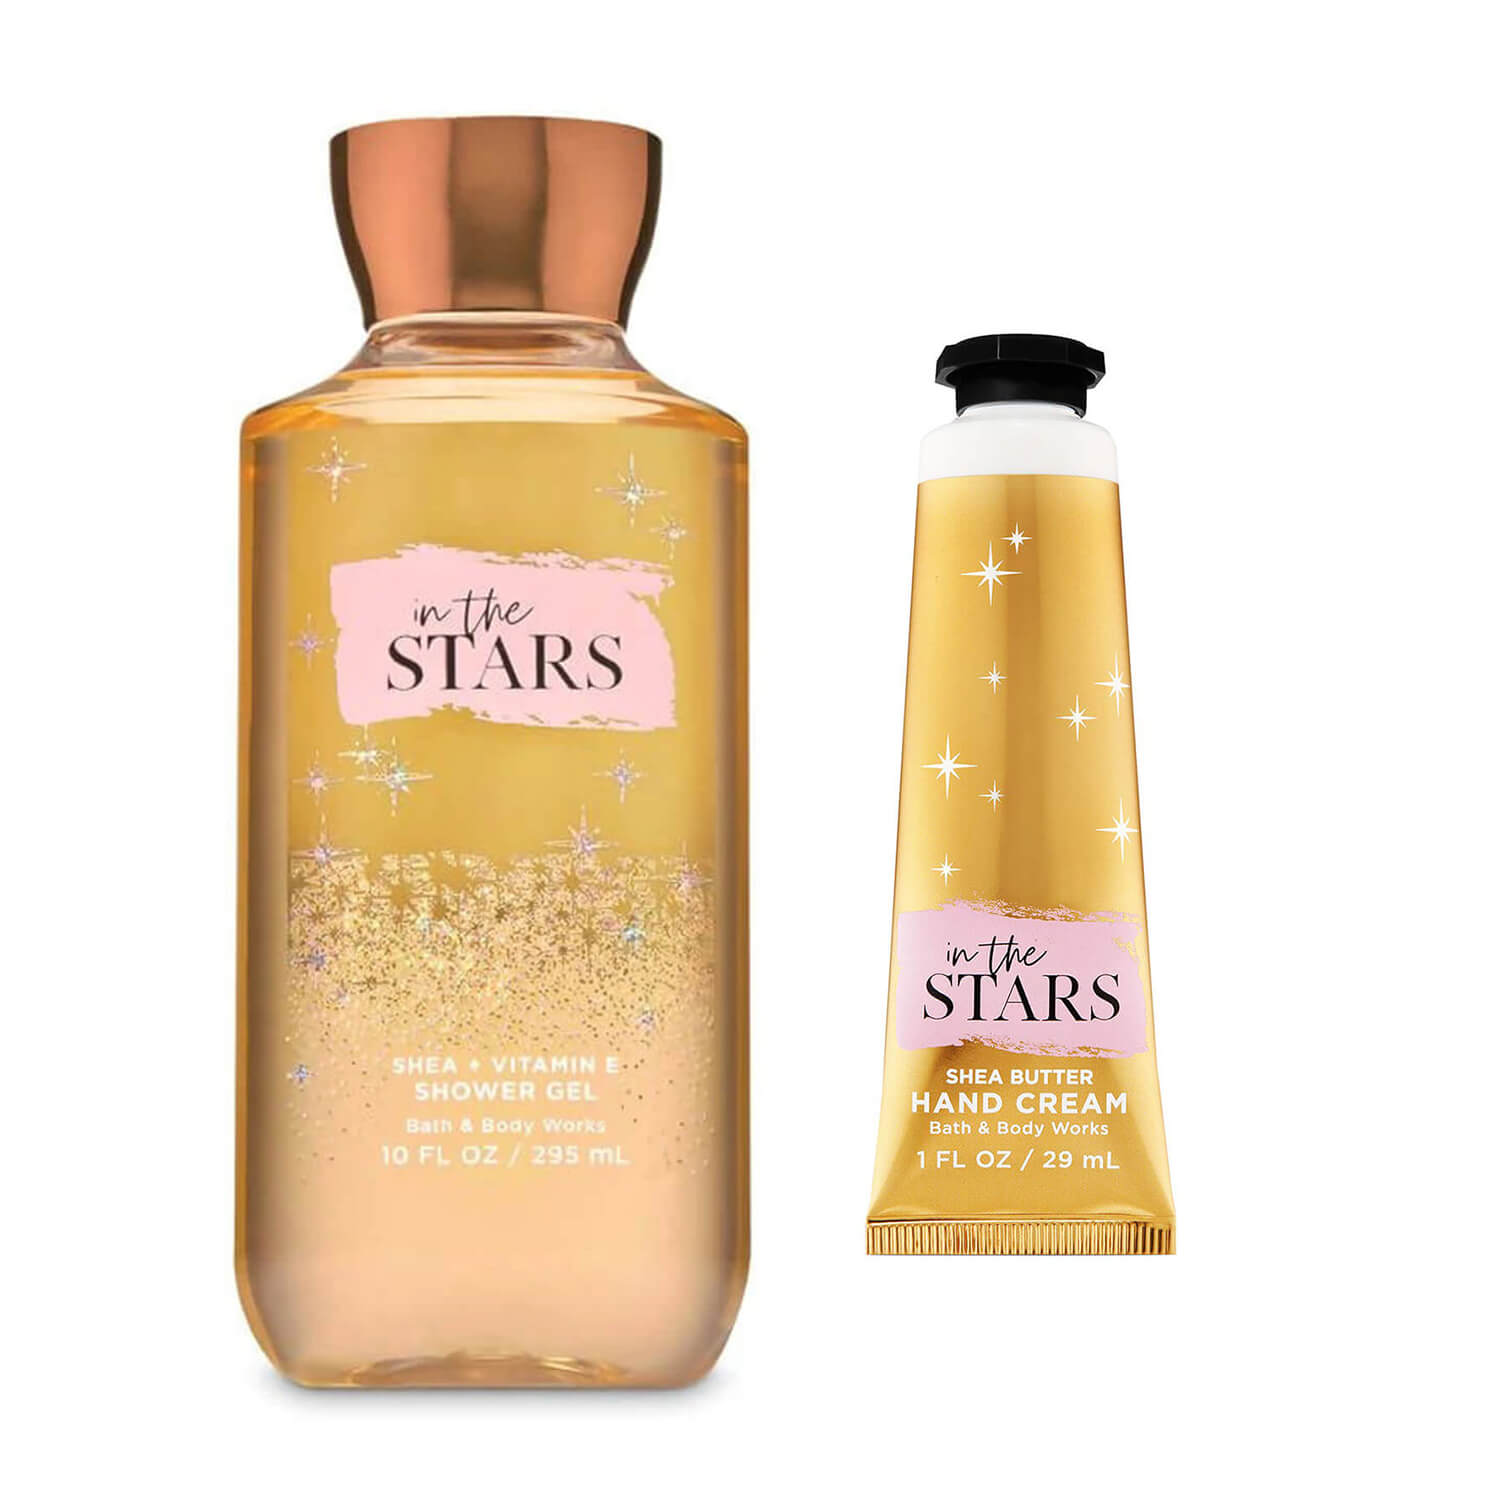 buy bath and body works shower gel and cream in The Stars fragrance available at Heygirl.pk for delivery in Pakistan